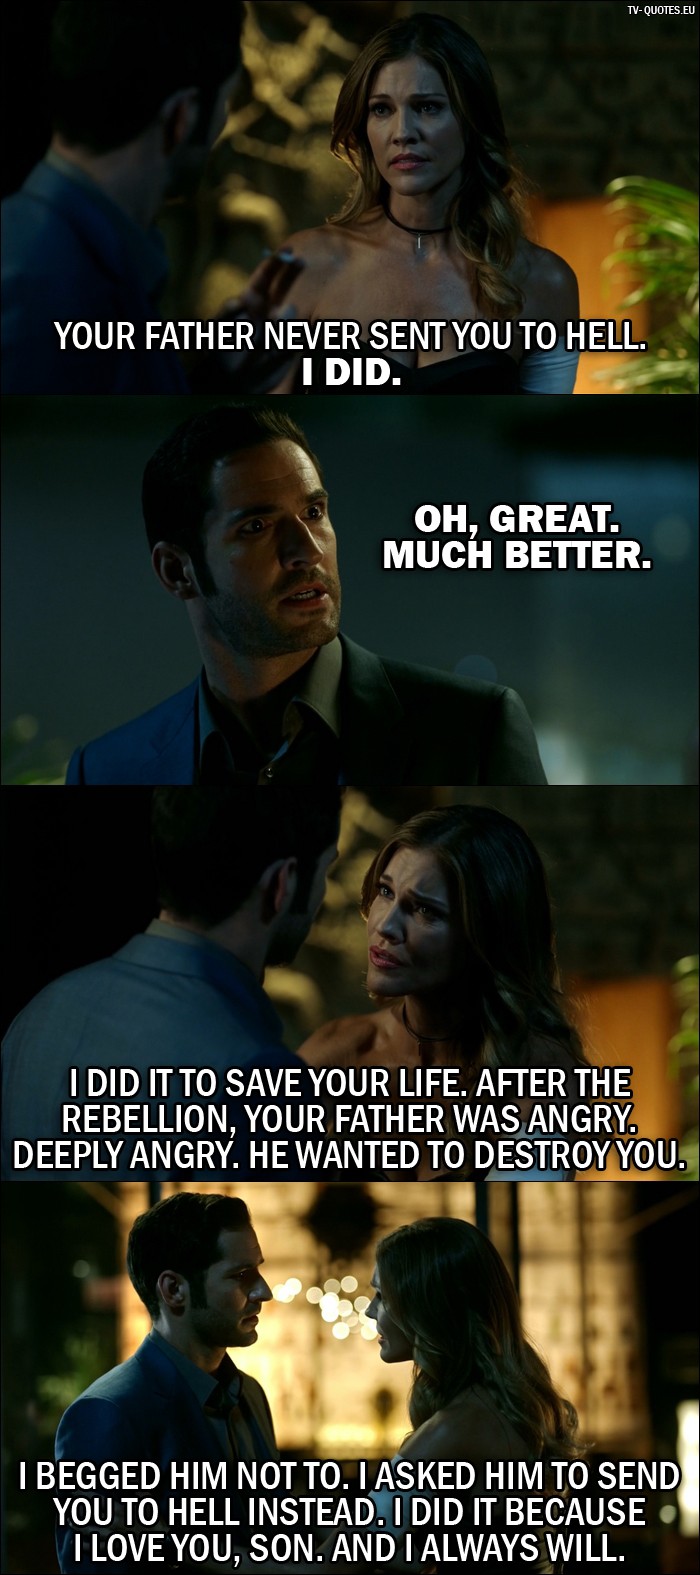 18 Best Lucifer Quotes from Liar Liar Slutty Dress on Fire 2x02